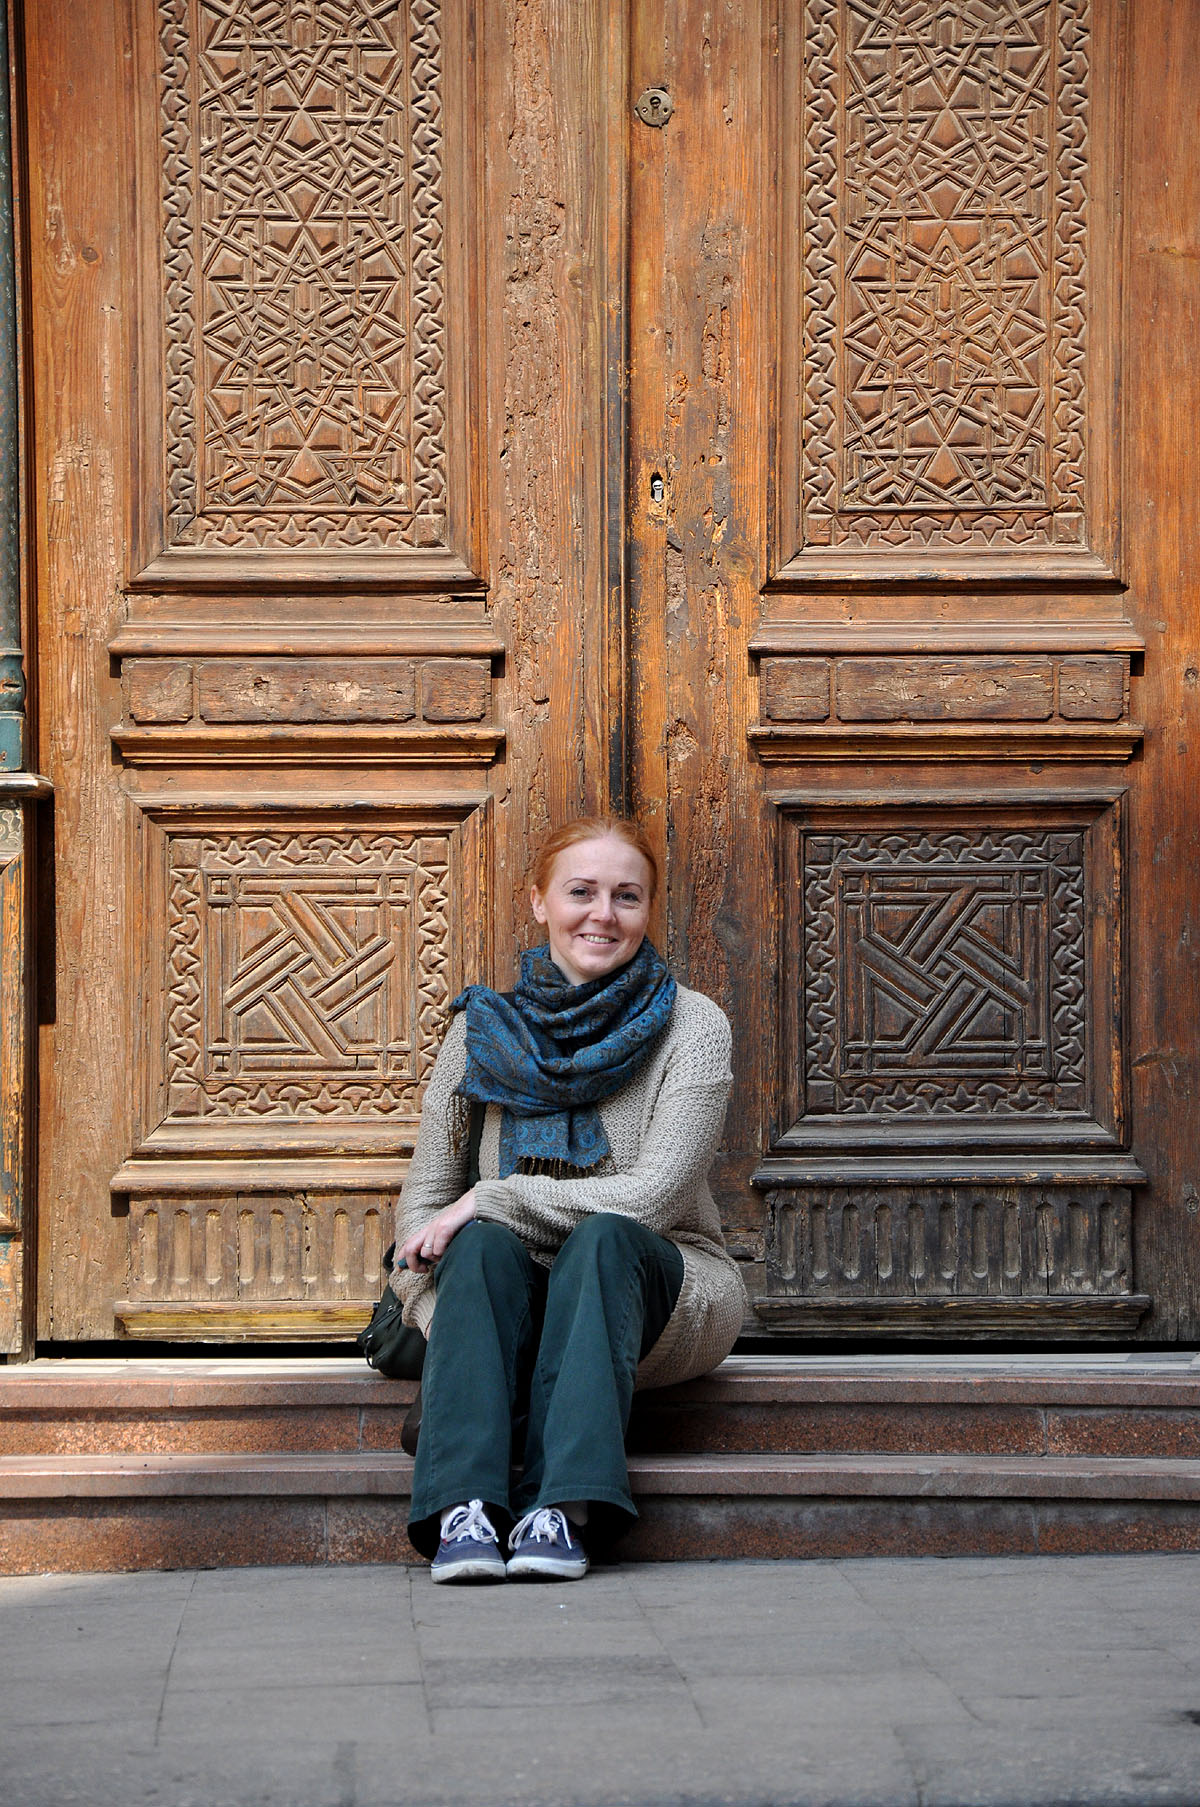 Dee sits on the stairs in front of an ornate wooden door in a building just off Moez Street in Cairo.